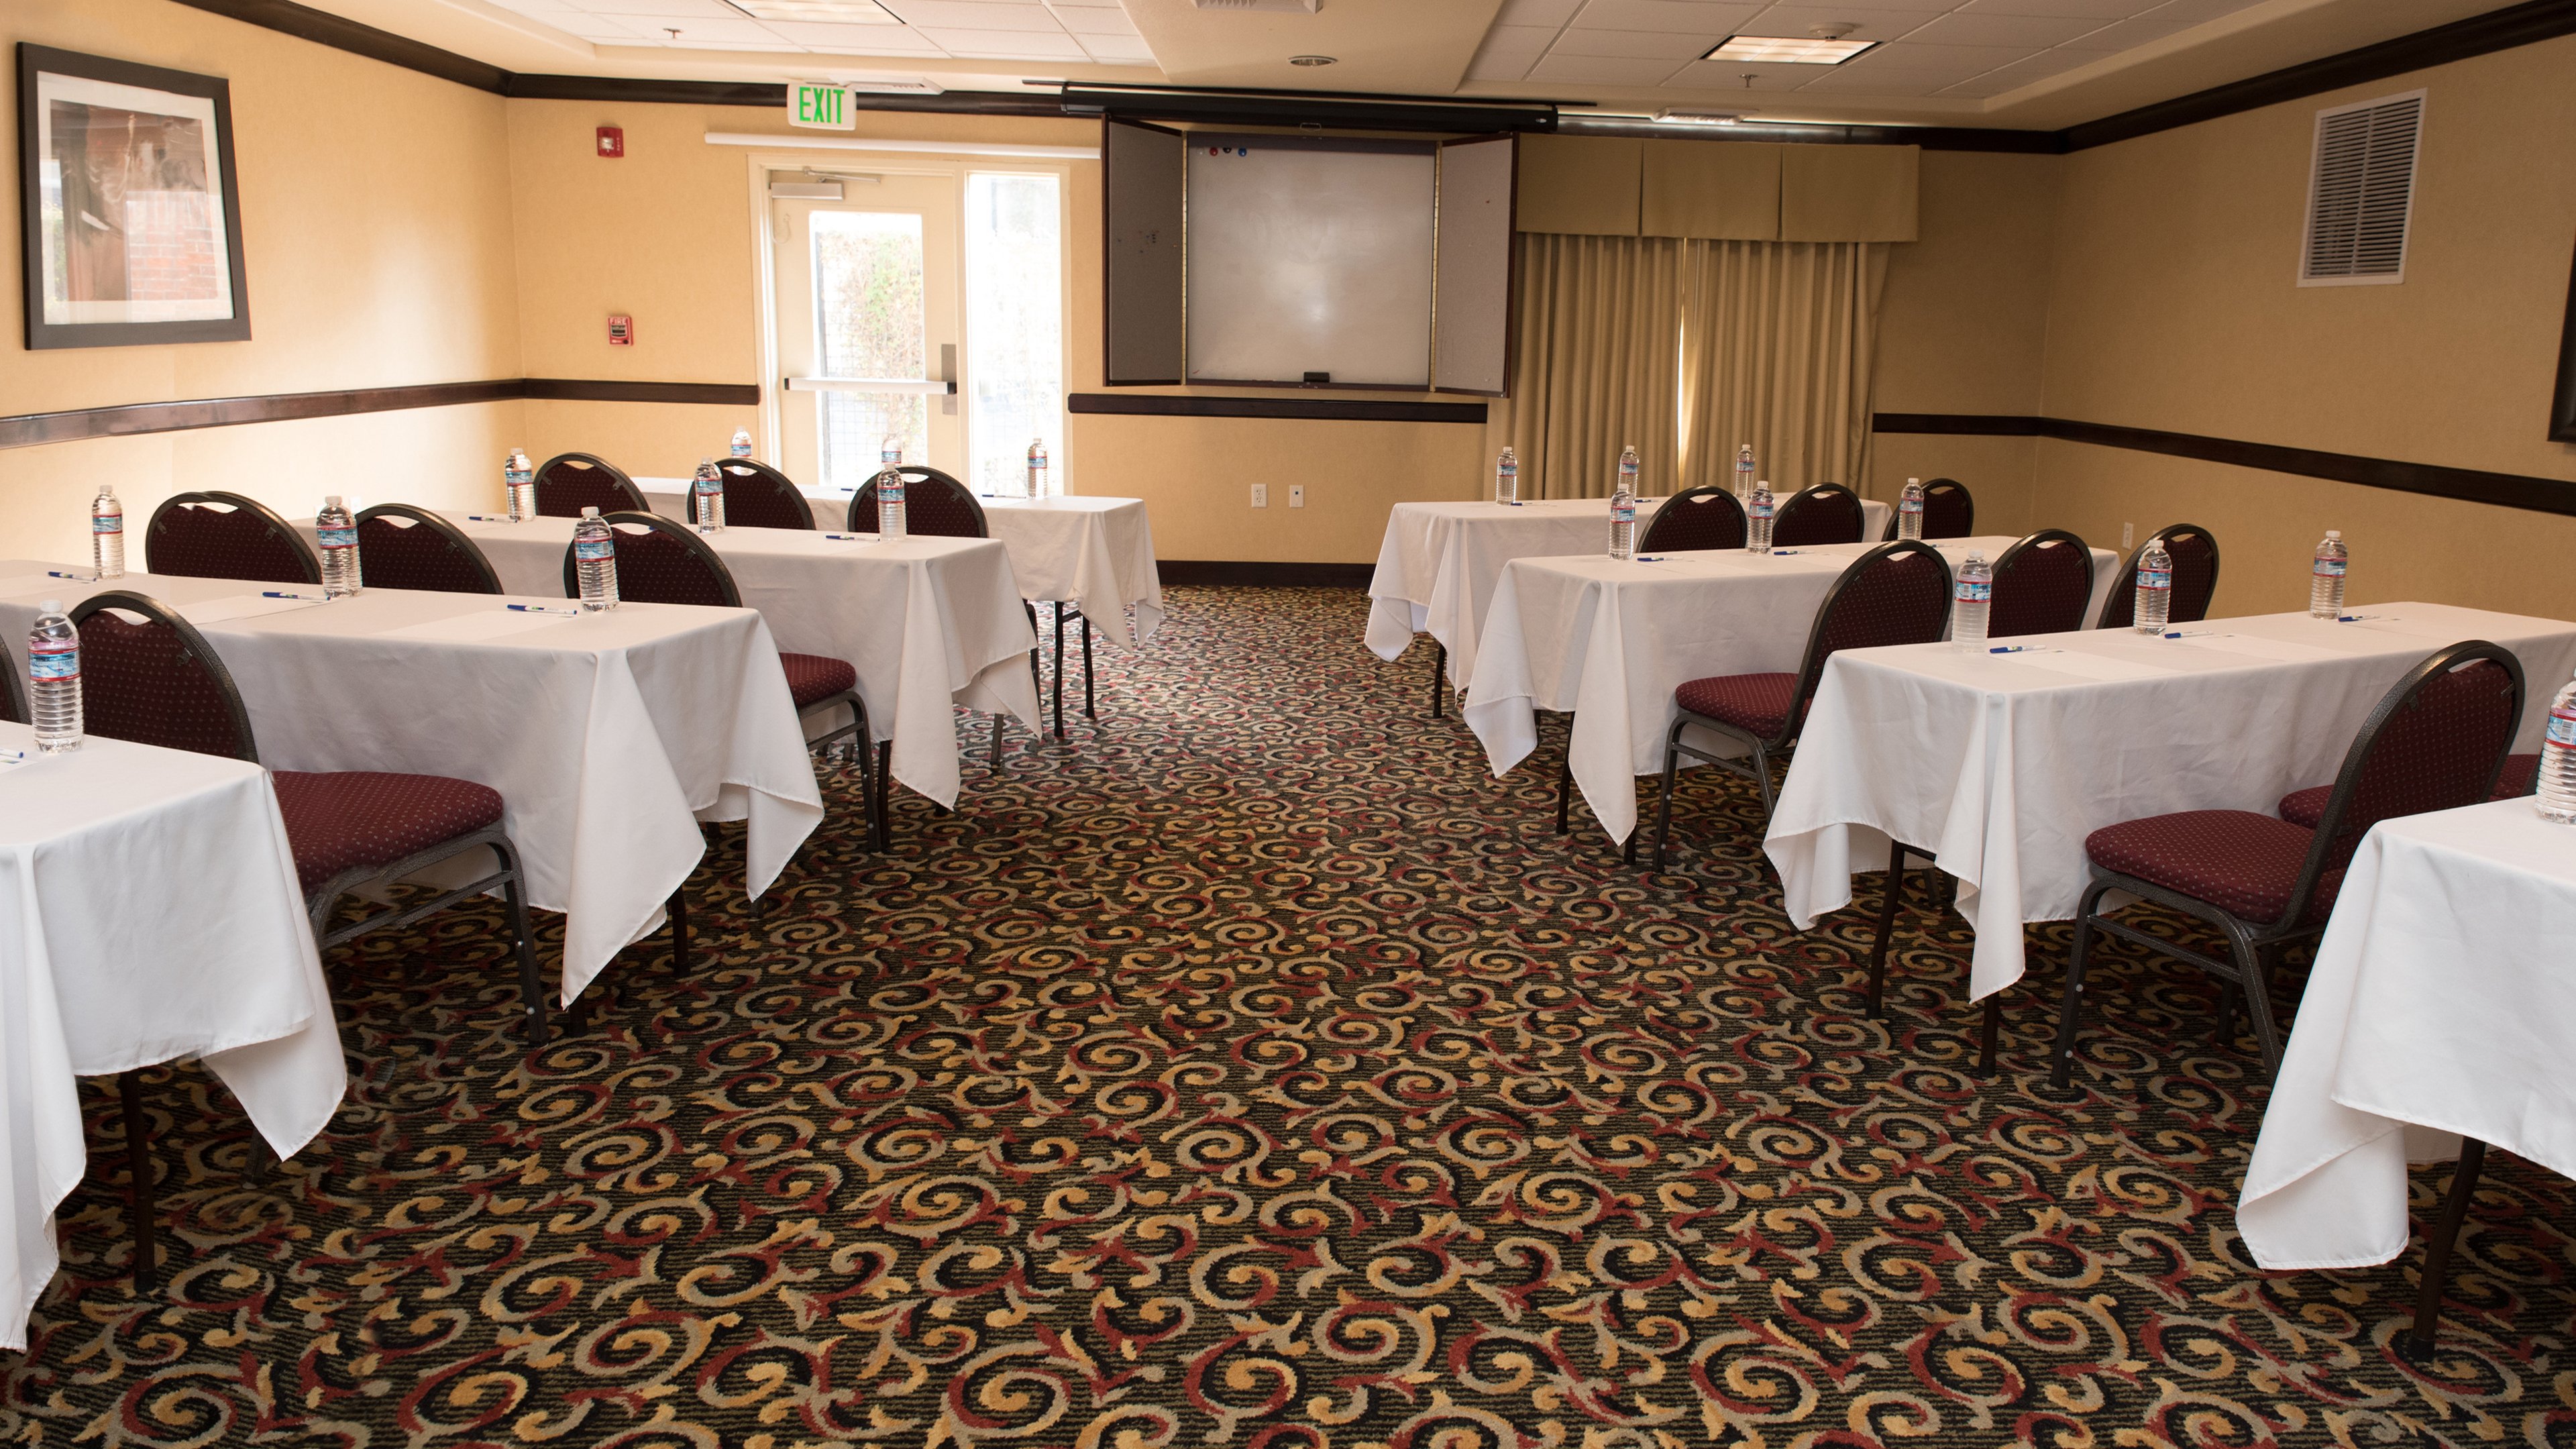 Reserve your next meeting with us!